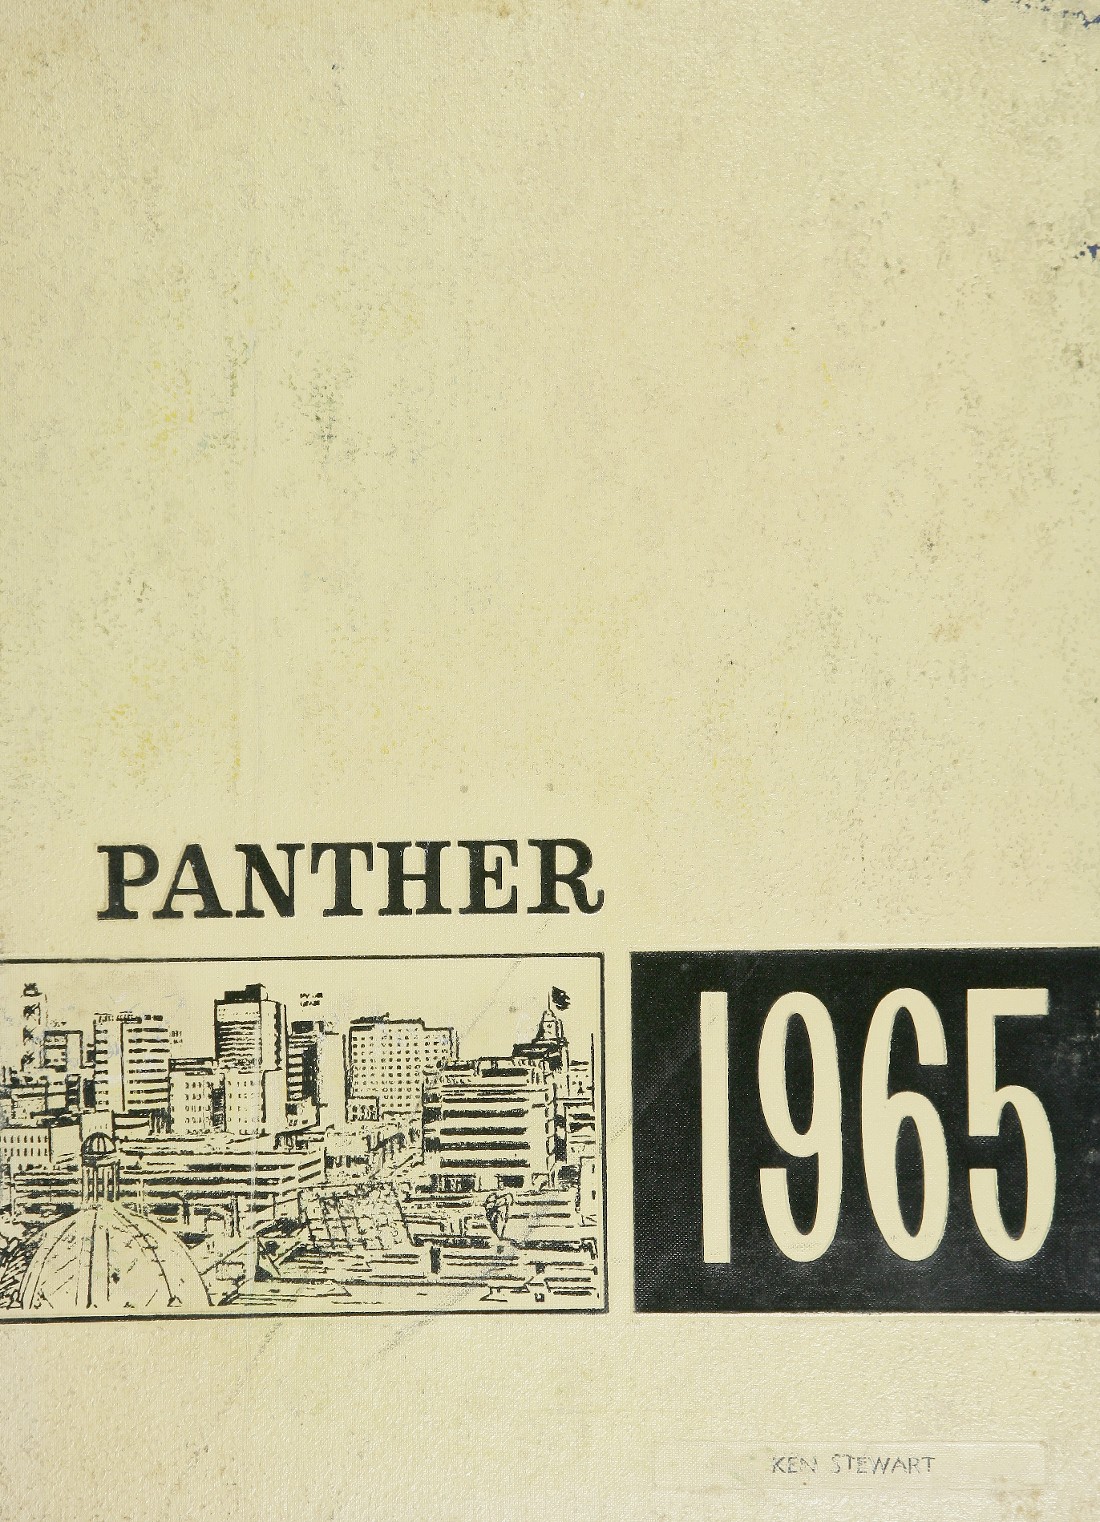 1965 yearbook from H. B. Plant High School from Tampa, Florida for sale